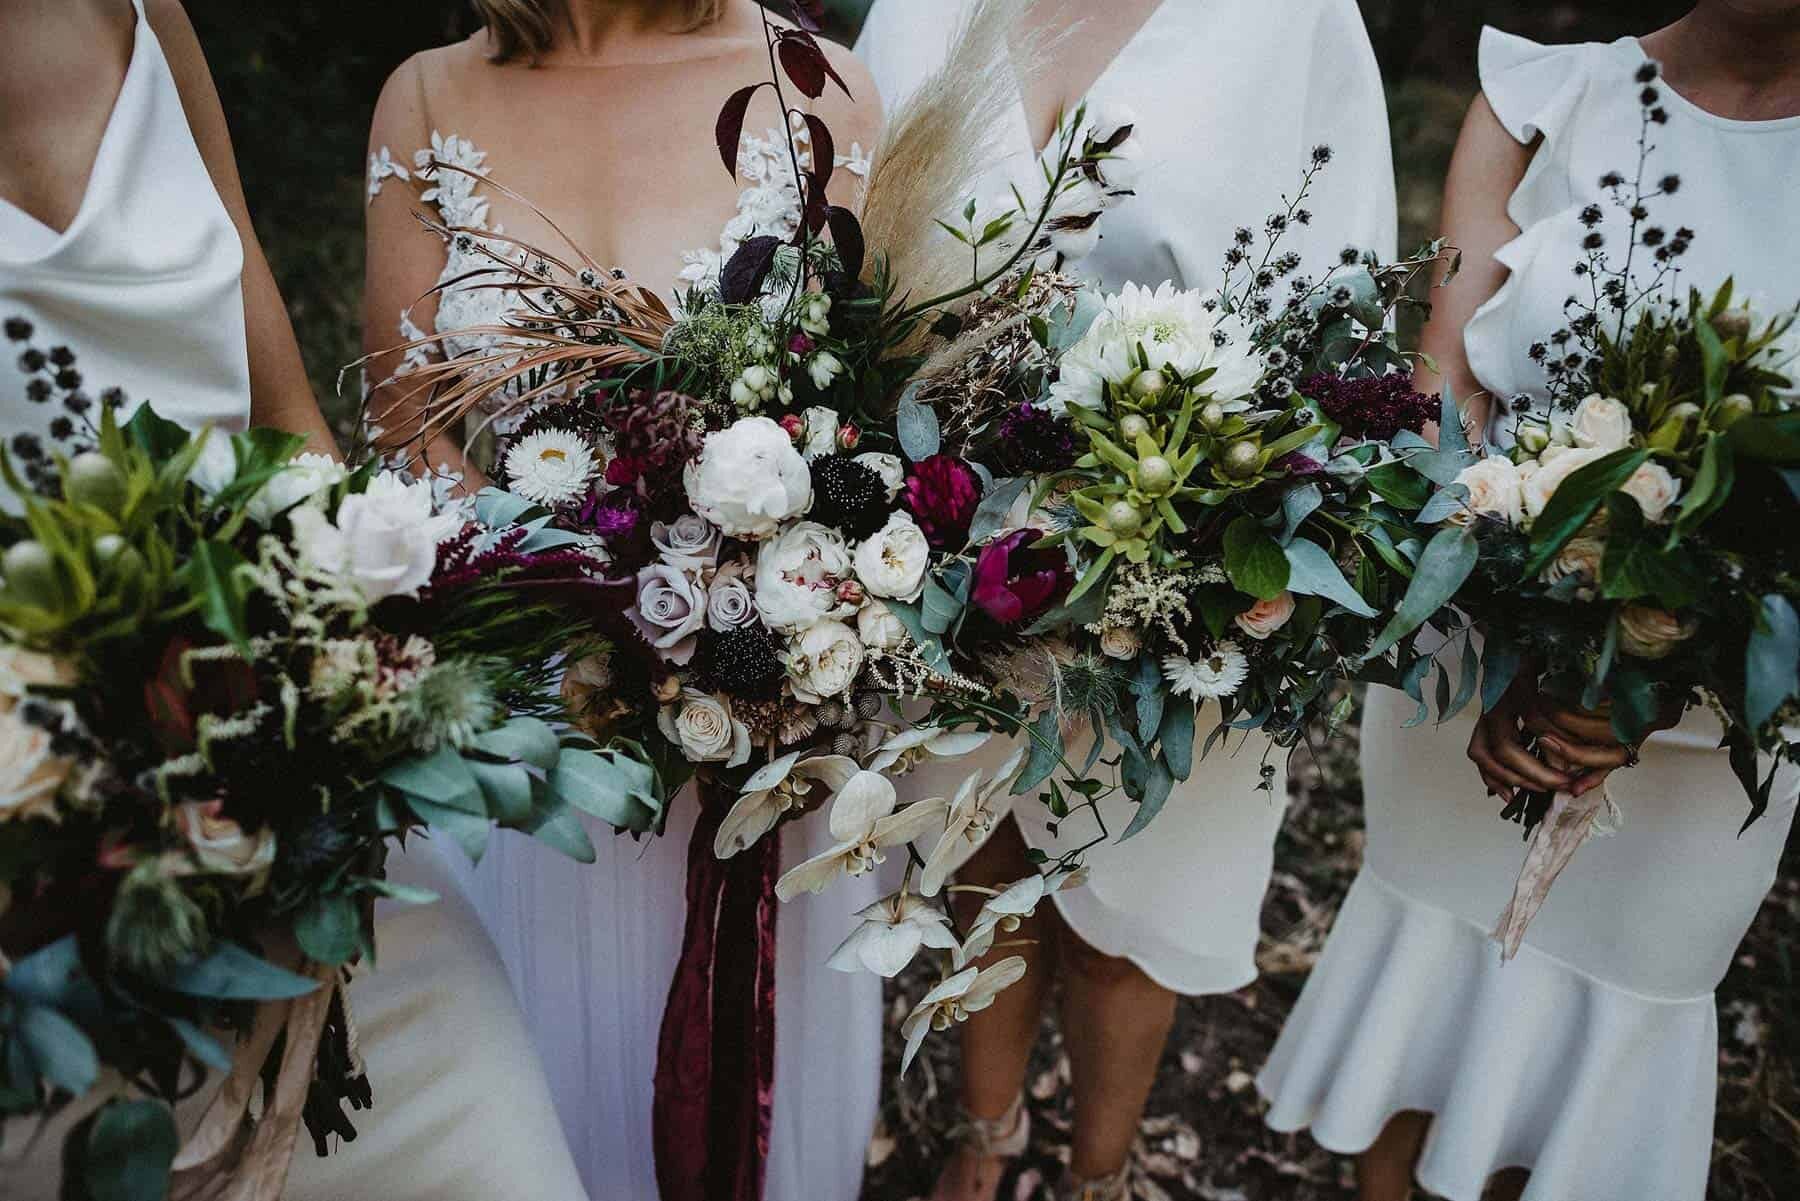 Native rustic wedding flower bouquet with white bridesmaid dresses